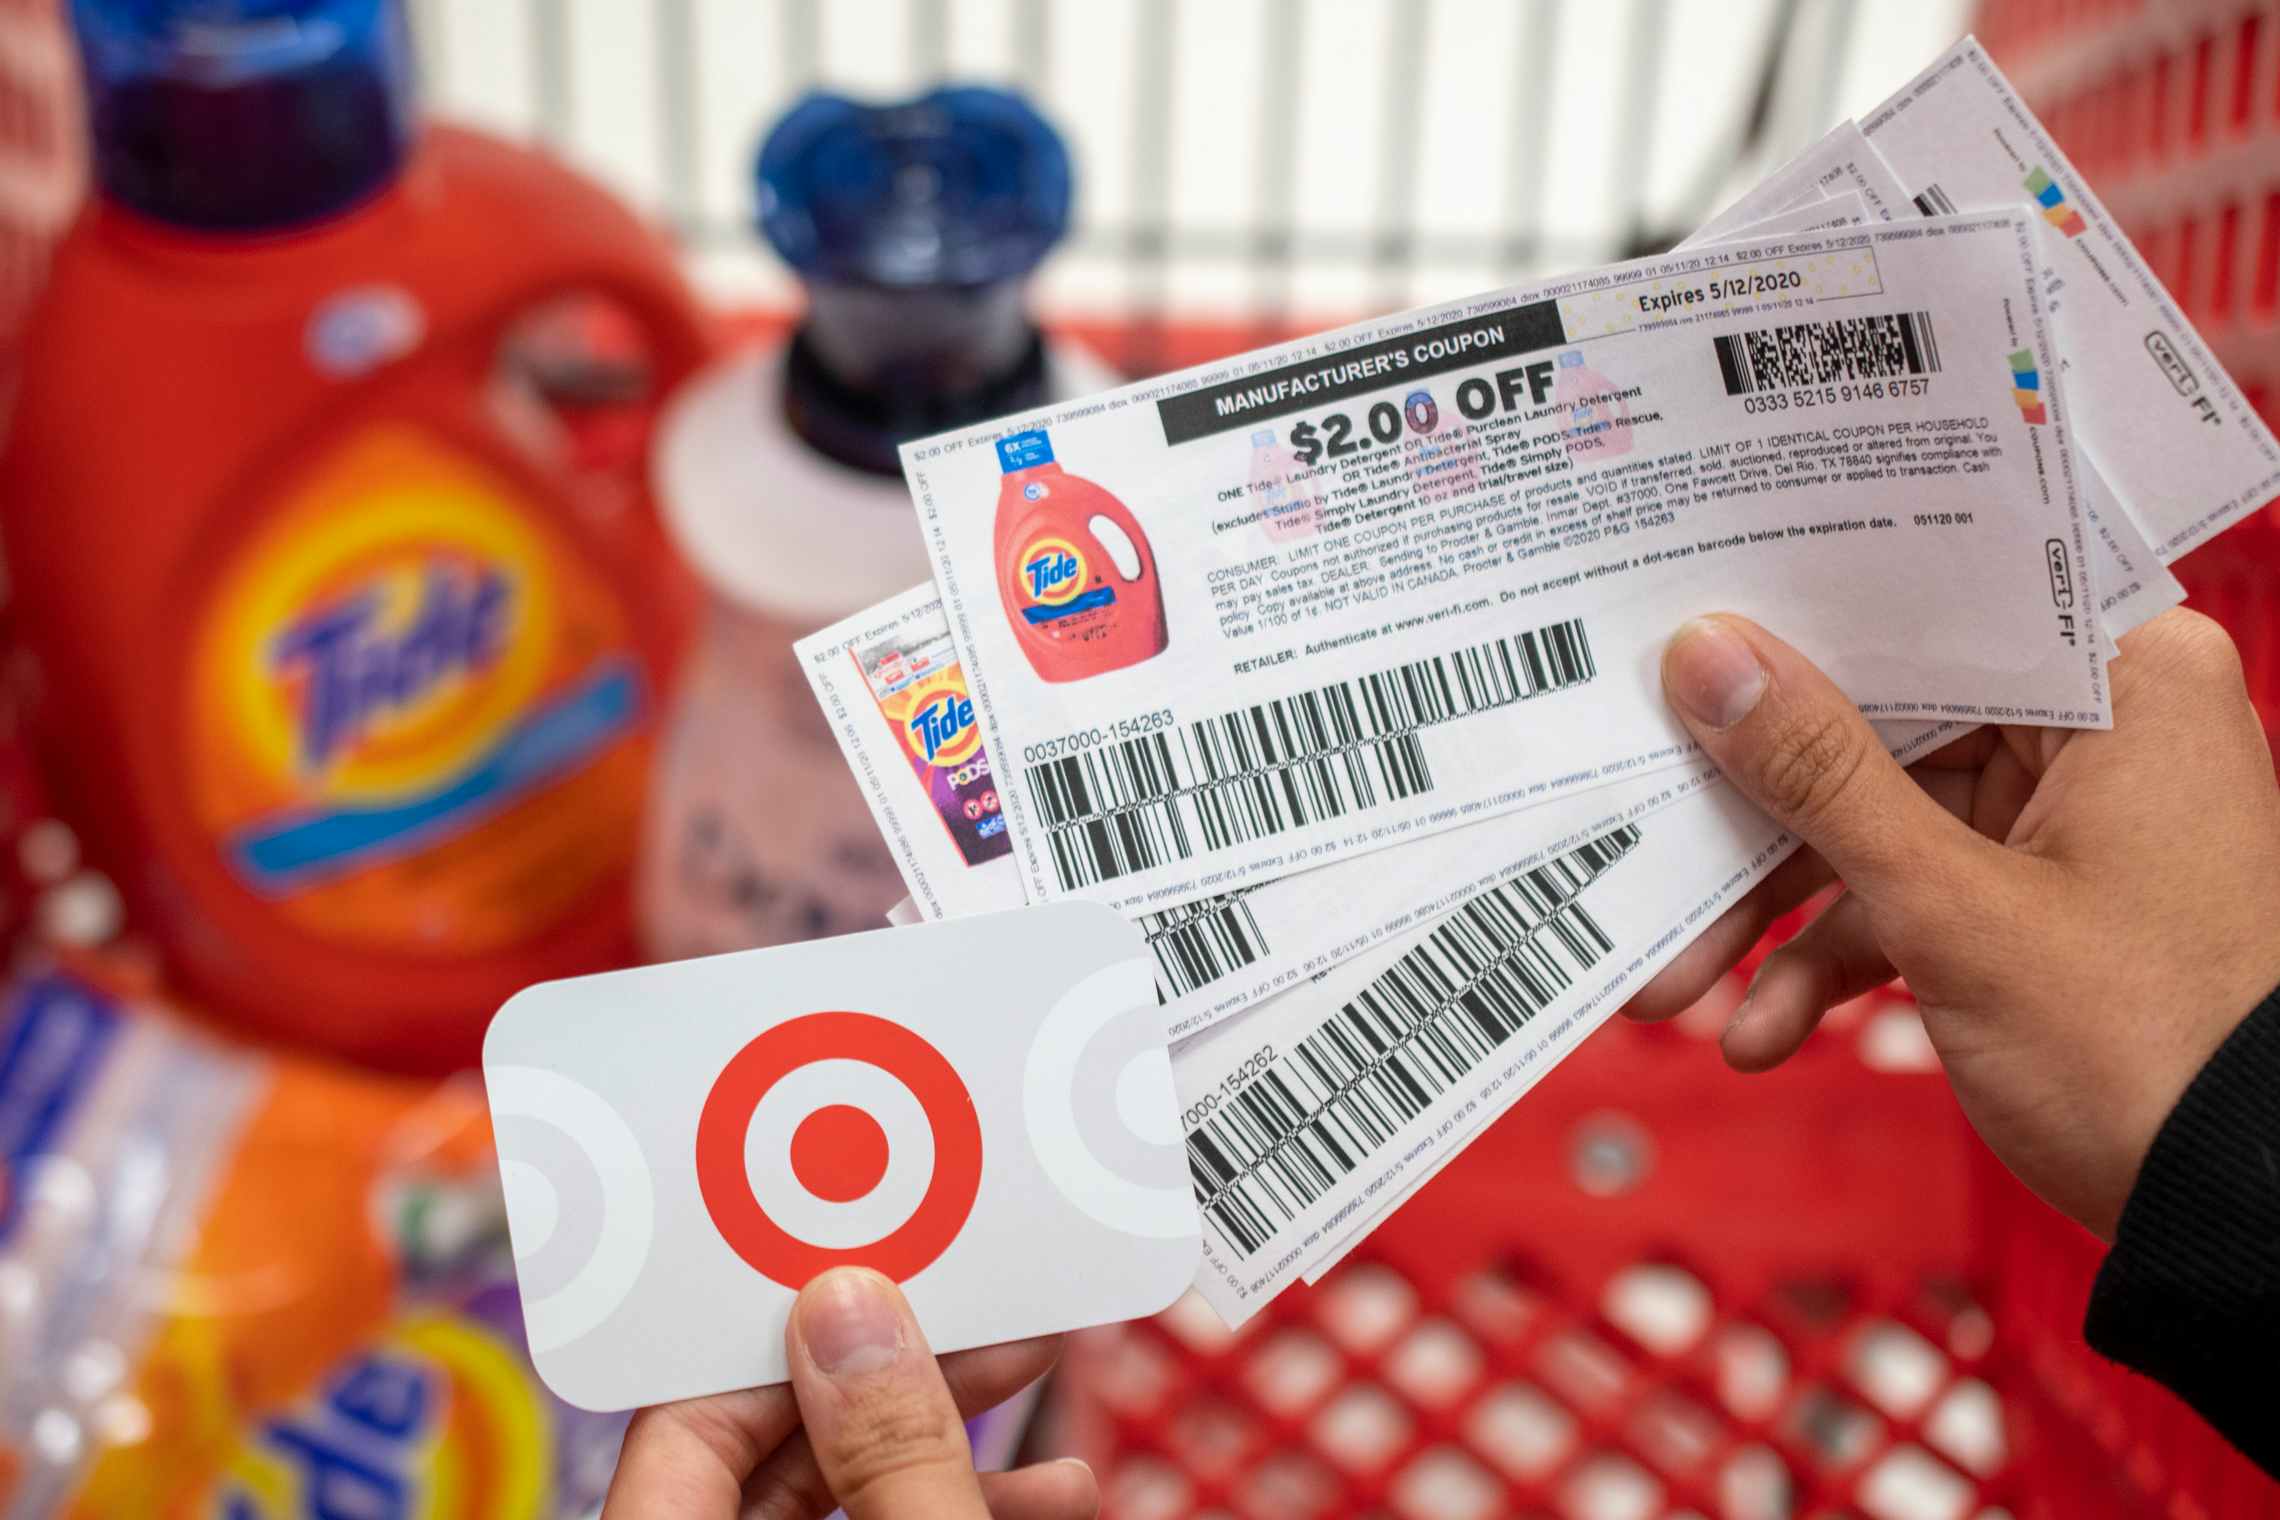 A person holding tide manufacture coupons in one hand and a Target gift card in the other, with a shopping card containing laundry detergents in the background.